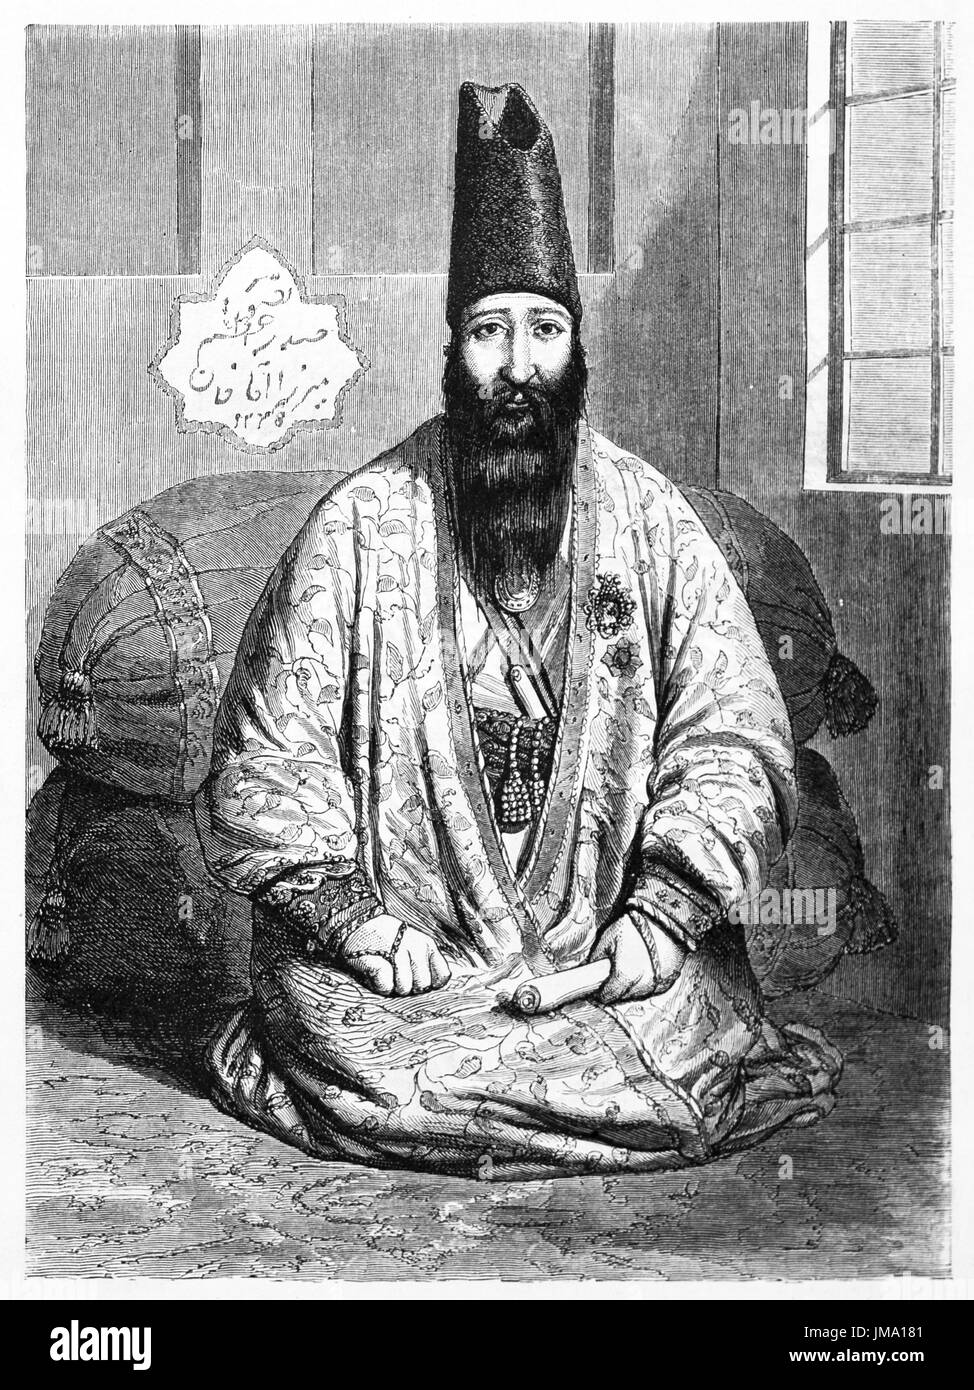 Old engraved portrait of Hajj Mirza Agashi (1783 – 1848), Prime Minister of Iran from 1835 to 1848. Created by Hadamard, published on Le Tour du Monde Stock Photo